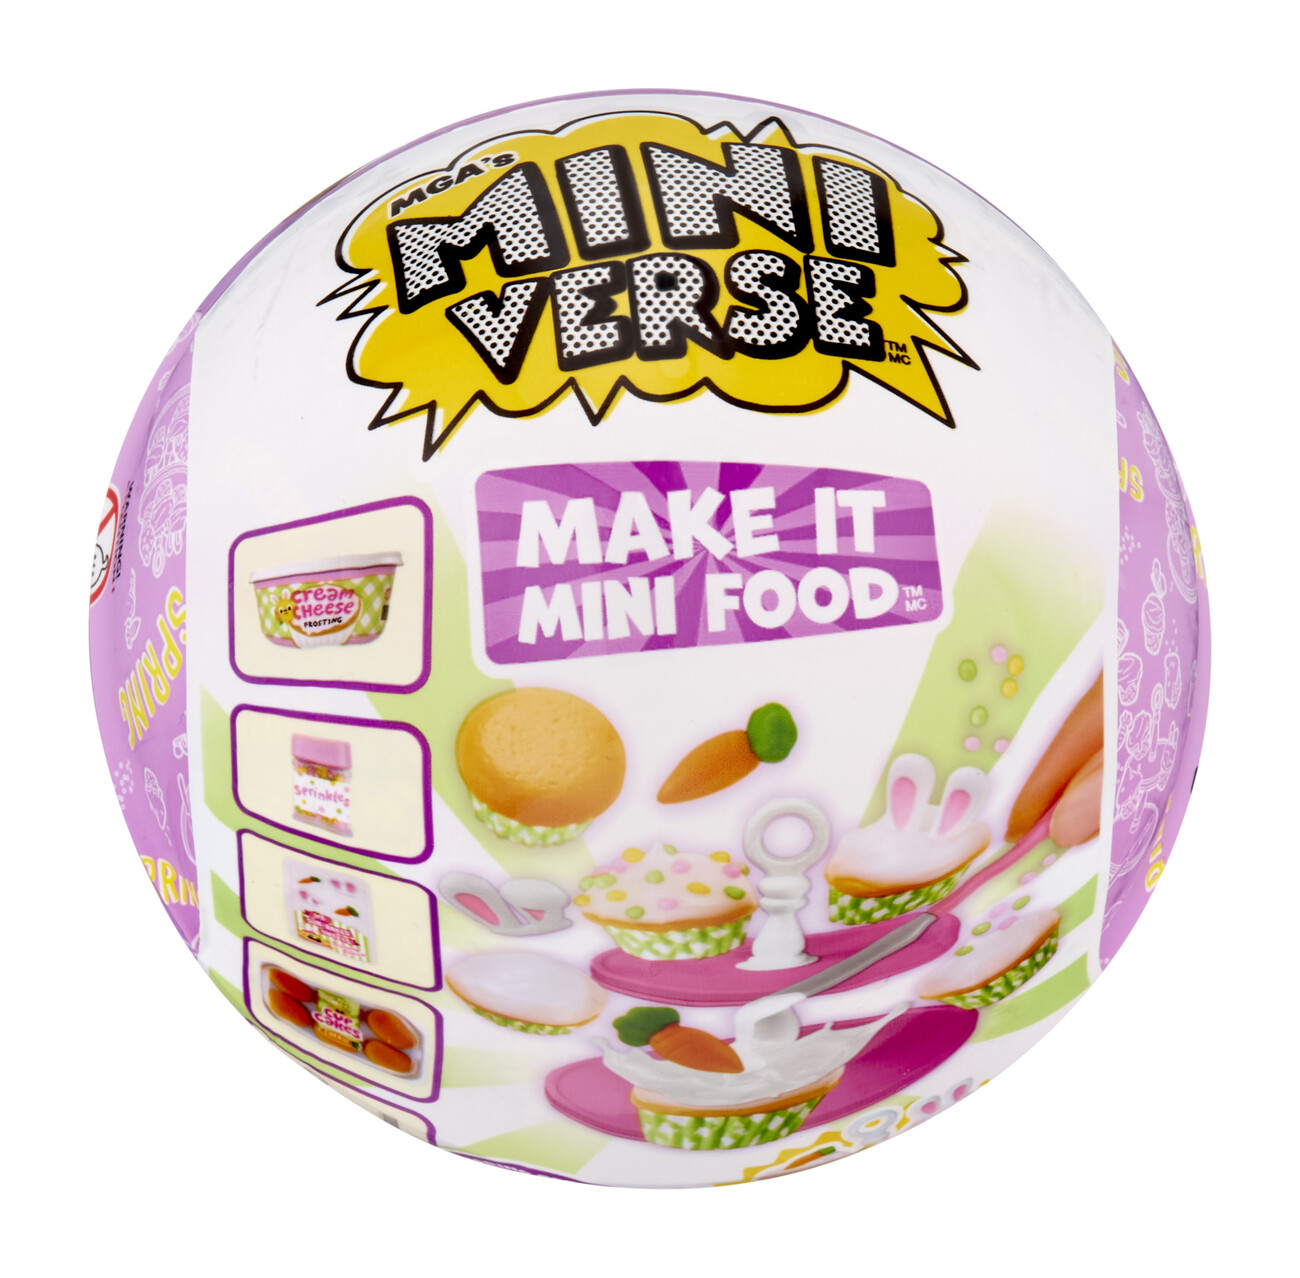 Toy Miniverse - Mini Food - Spring Refreshment, Posters, Gifts, Merchandise